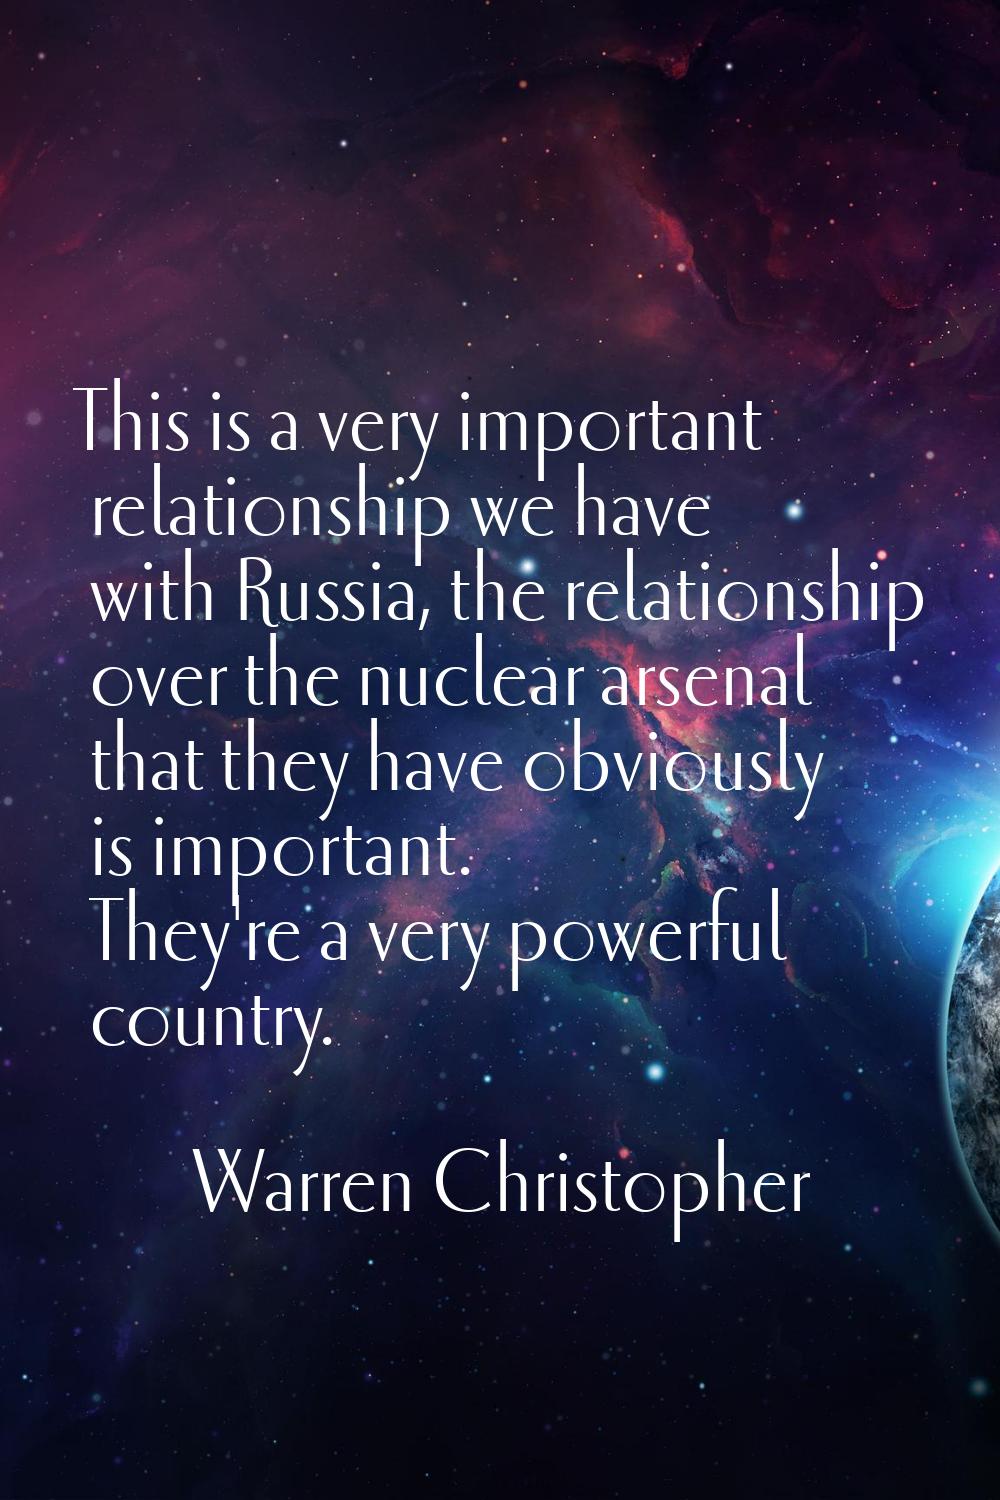 This is a very important relationship we have with Russia, the relationship over the nuclear arsena